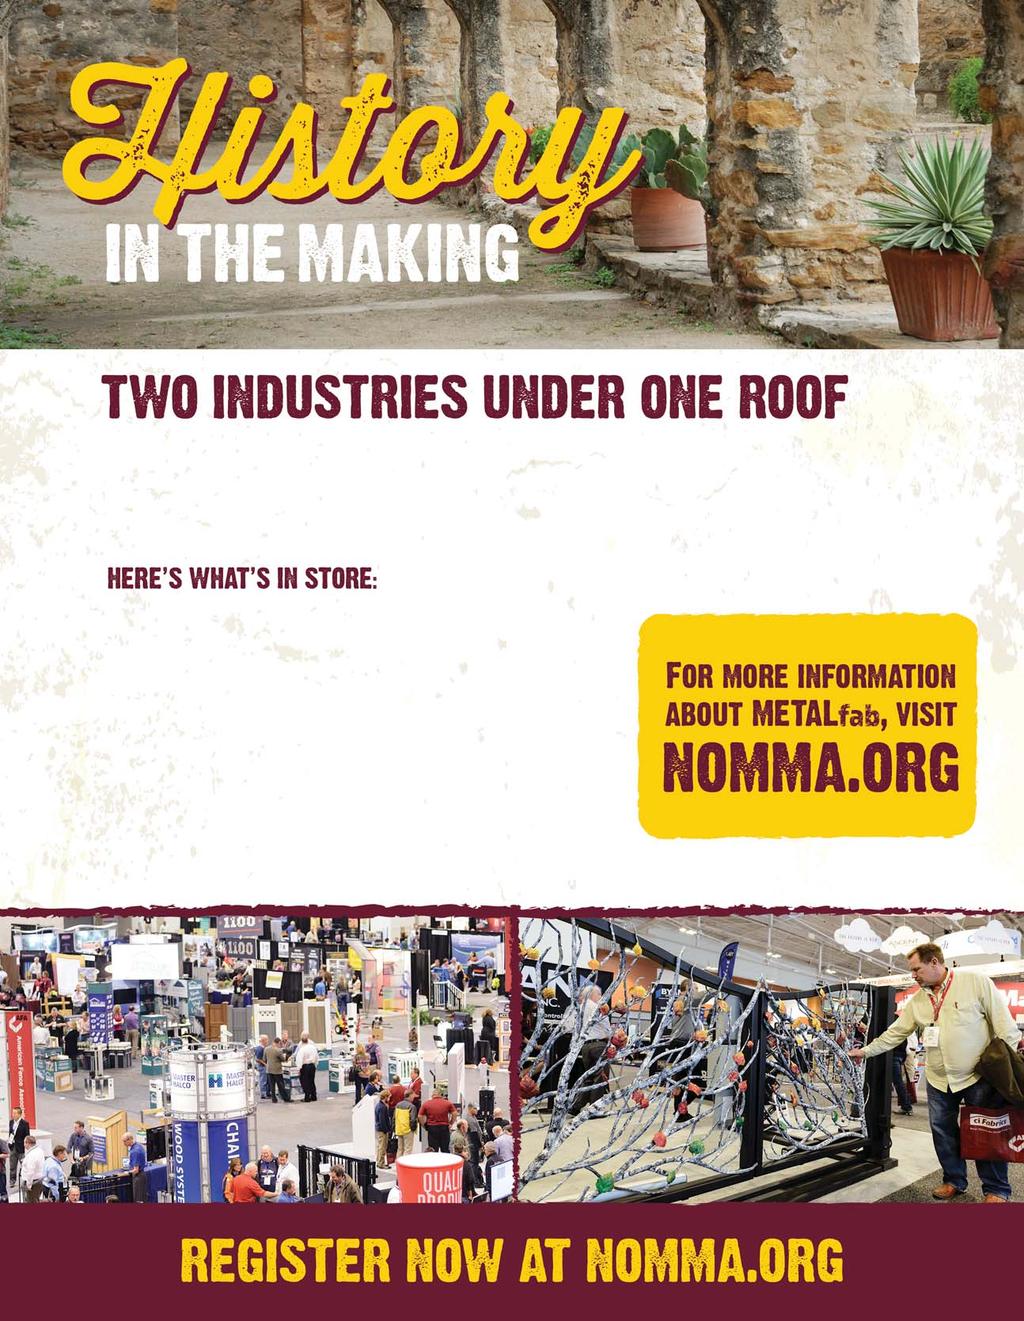 NOMMA is excited to announce the co-location of METALfab at The American Fence Association s FENCETECH in San Antonio for the largest gathering of the fence and ornamental and miscellaneous metals